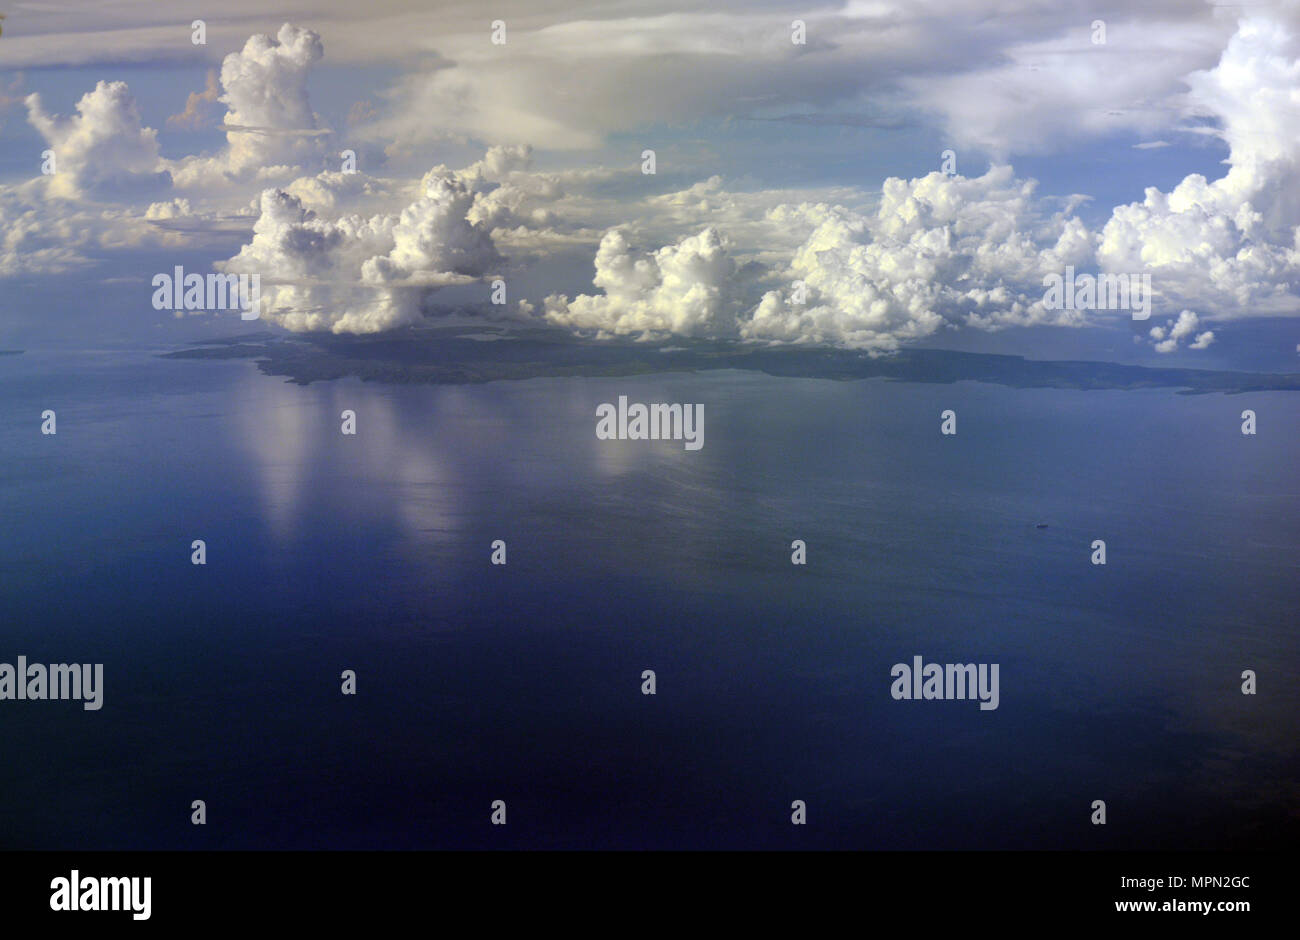 Stormy weather over and island in the Visayas, Philippines. Stock Photo